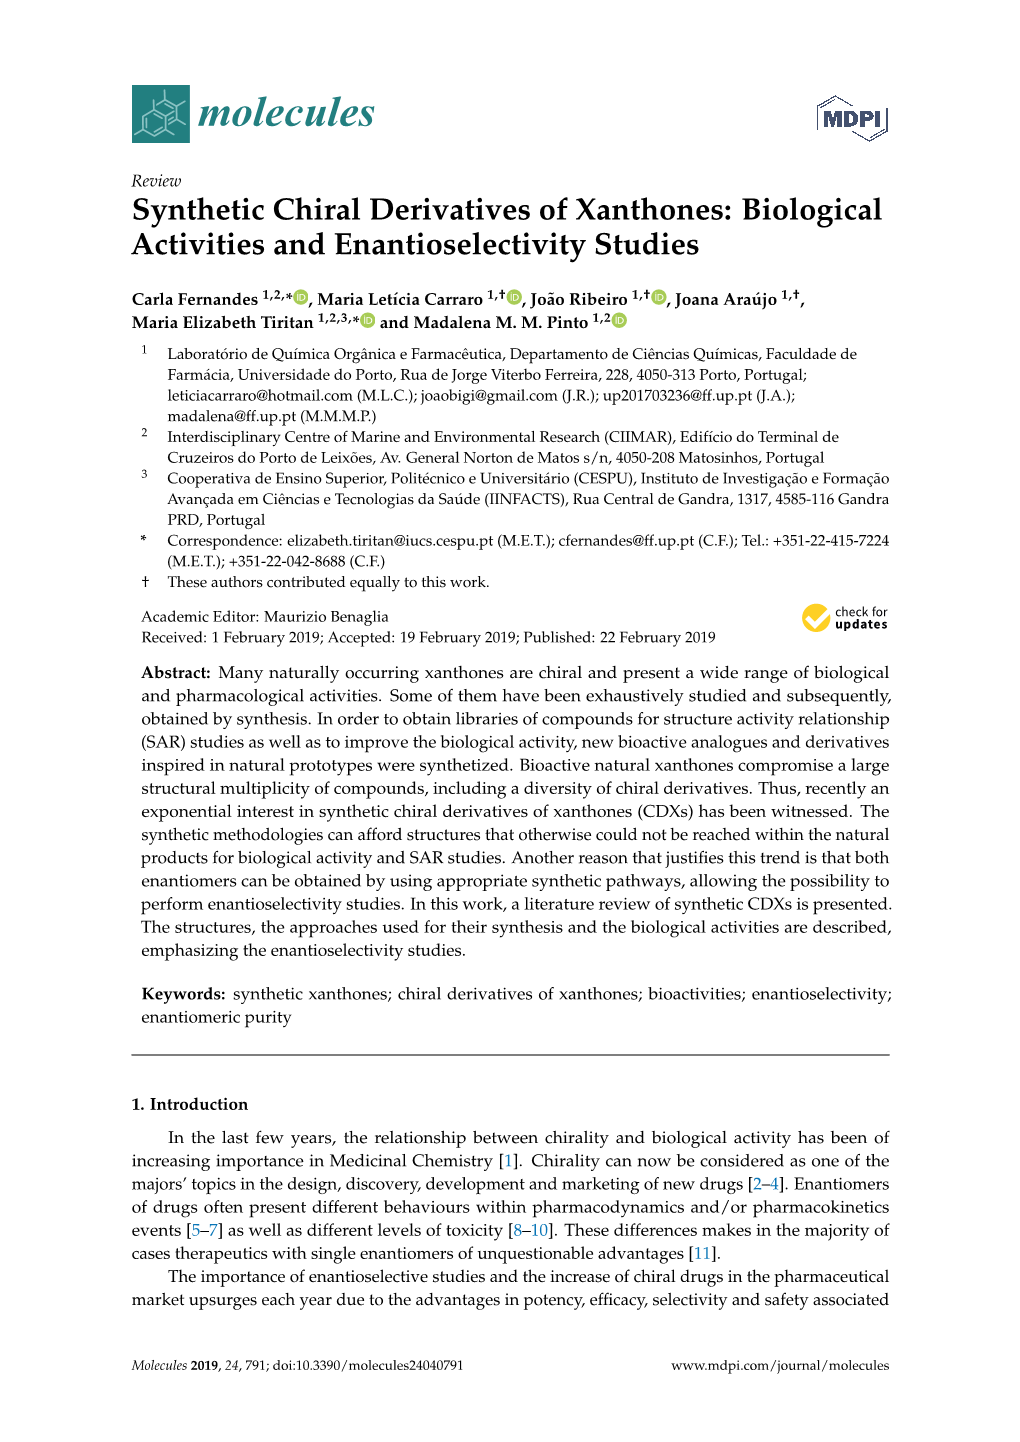 Synthetic Chiral Derivatives of Xanthones: Biological Activities and Enantioselectivity Studies